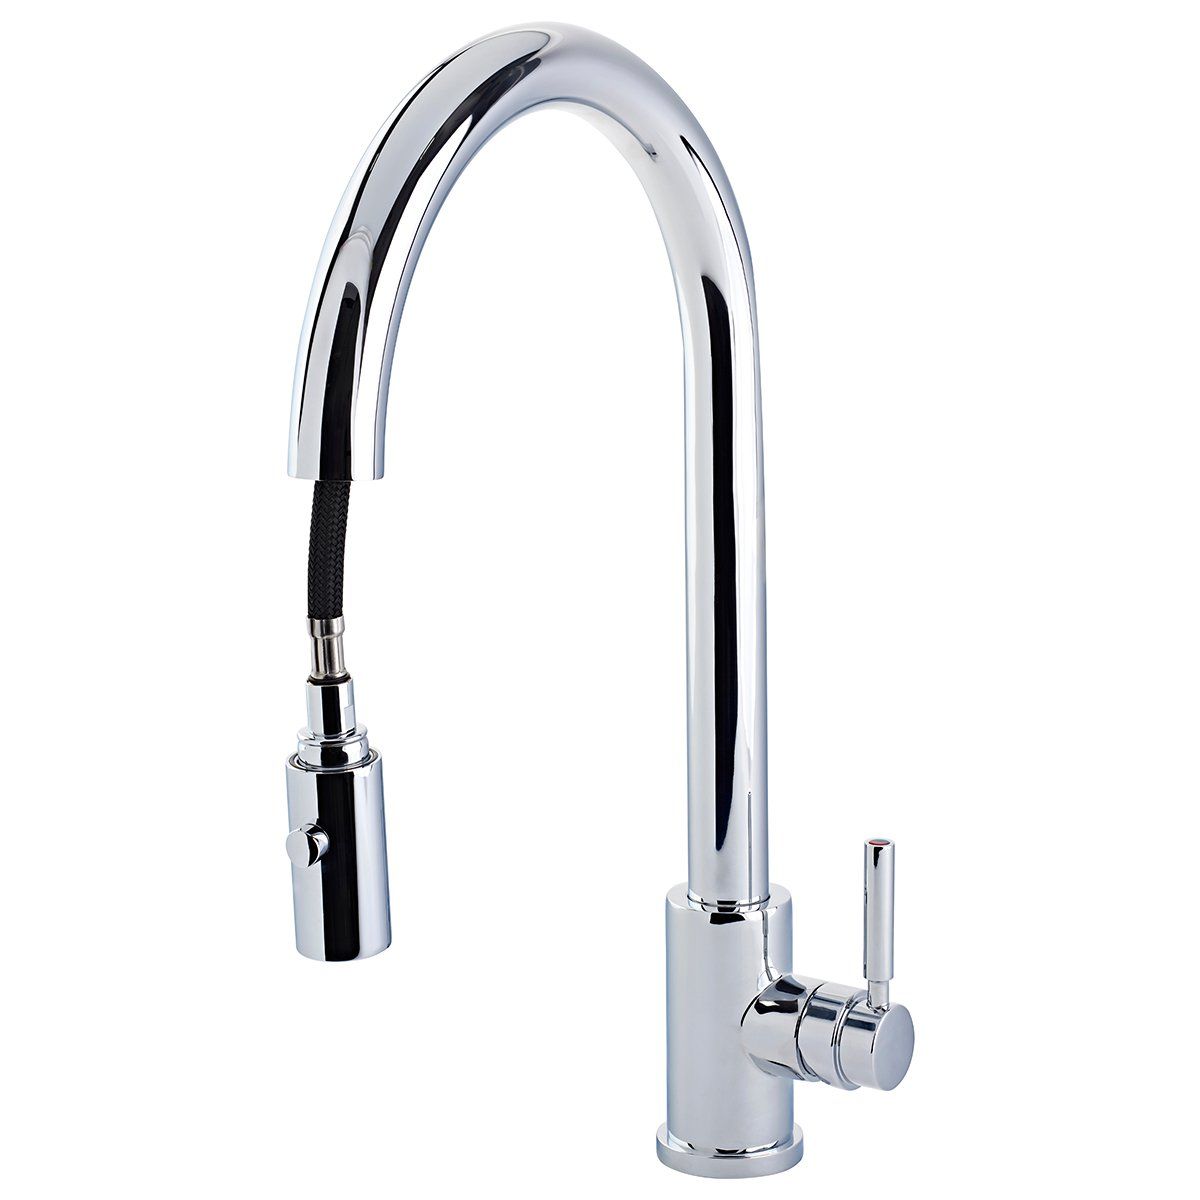 Juliet Mono Mixer tap with Pull Down Rinse – Perrin & Rowe